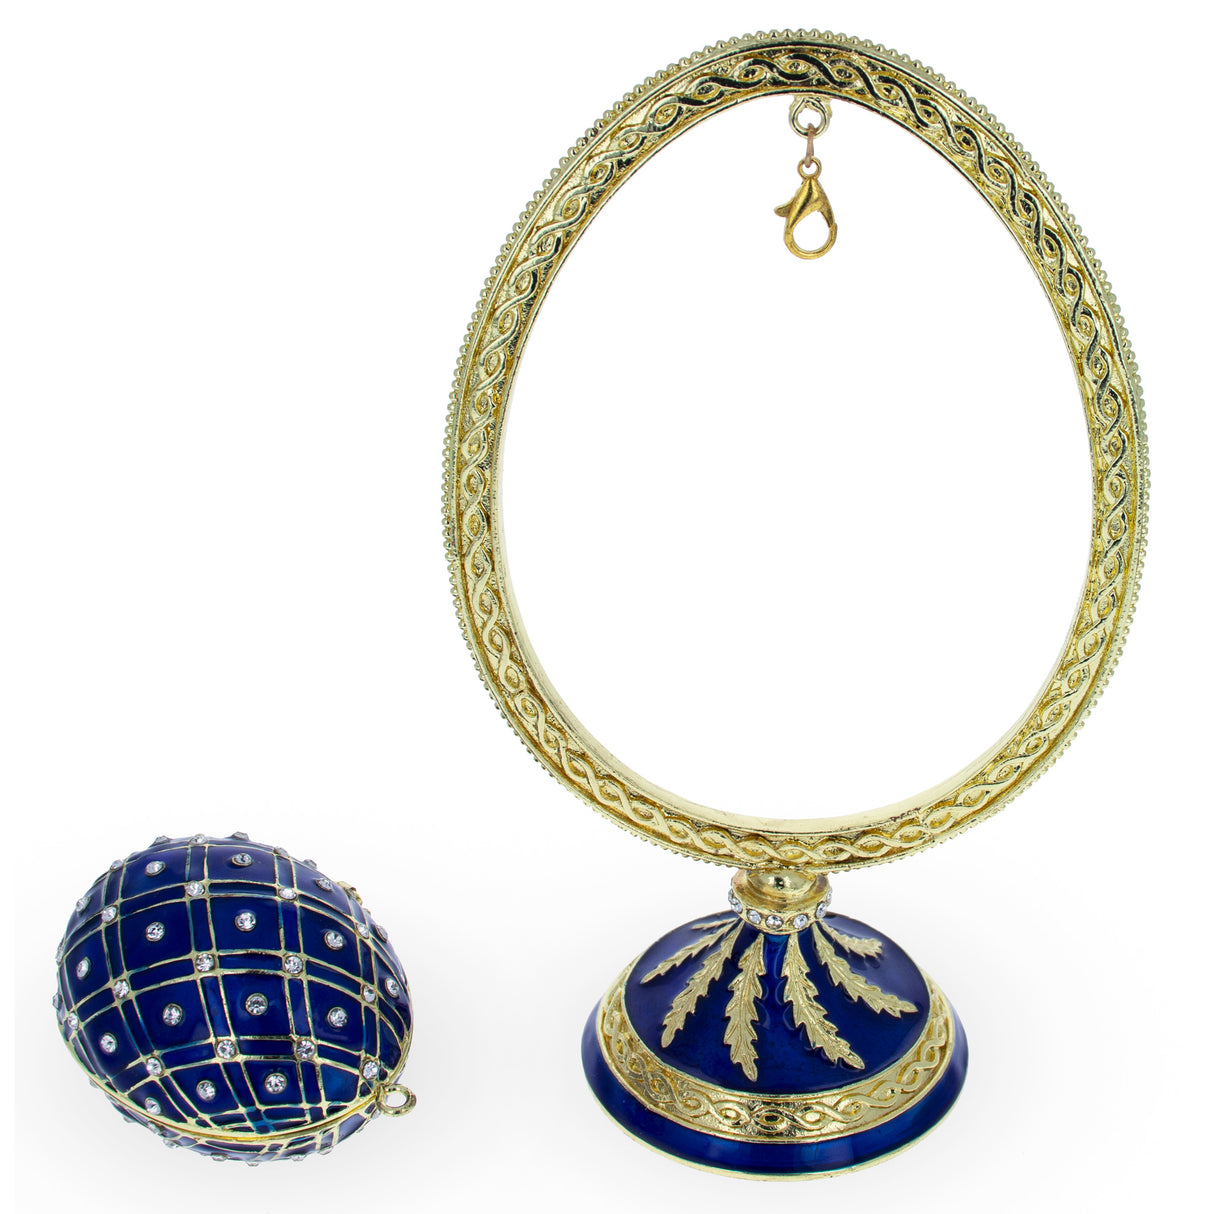 Blue Enamel Jeweled Easter Egg in the Egg Shaped Display Holder Figurine ,dimensions in inches: 5.6 x  x 3.4